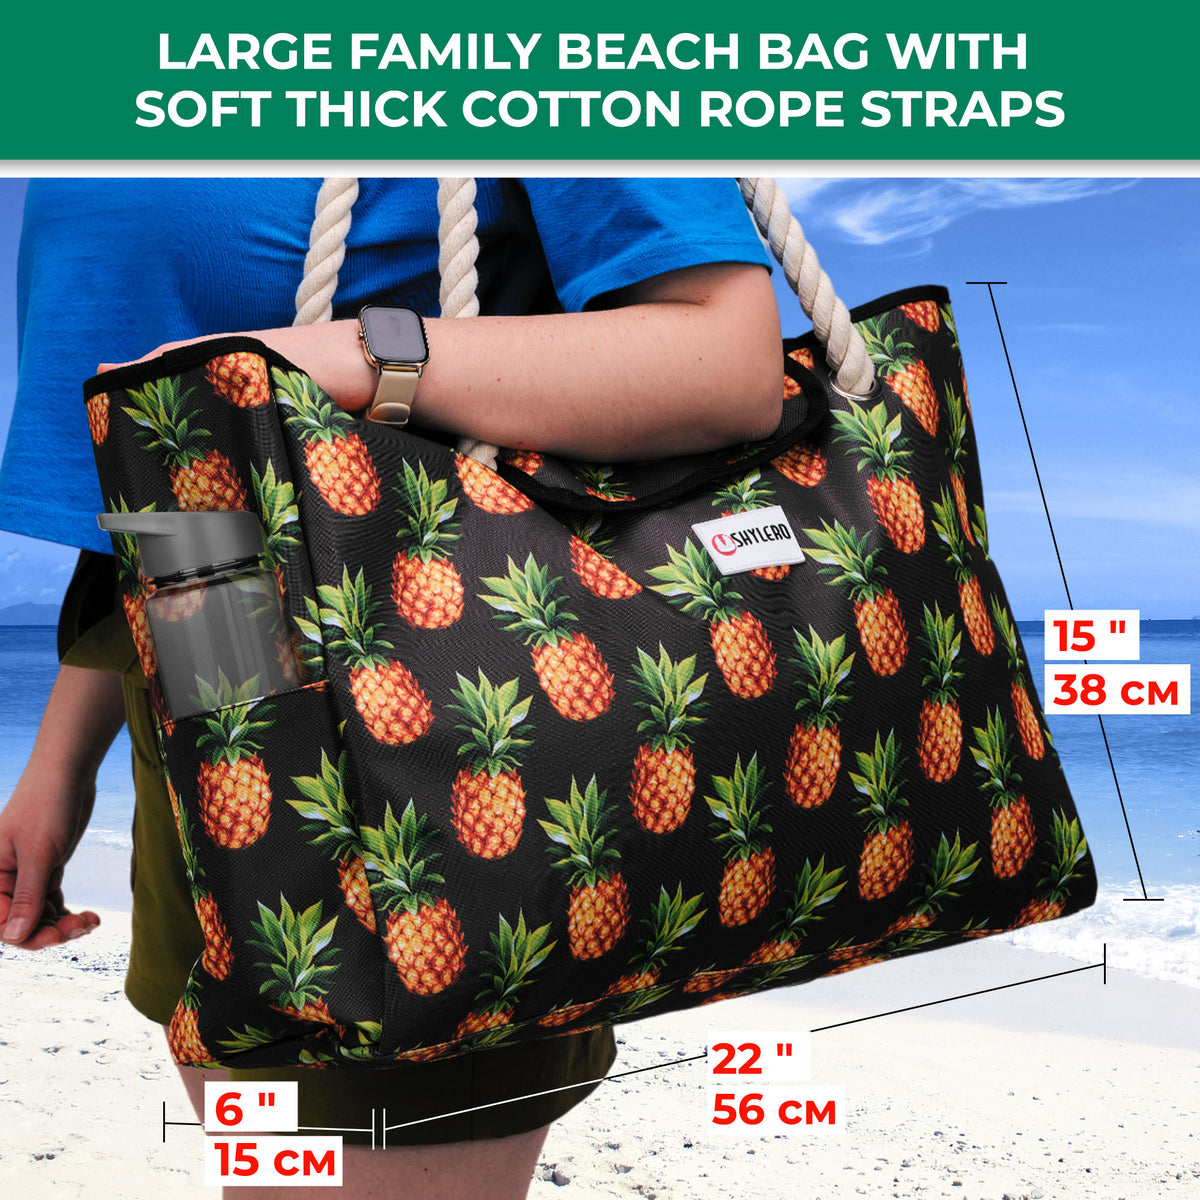 Beach Bag and Pool Bag | Water Repellent | Top Magnet | Family Size XXL | L22" x H15" x W6" | Black With Pineapples